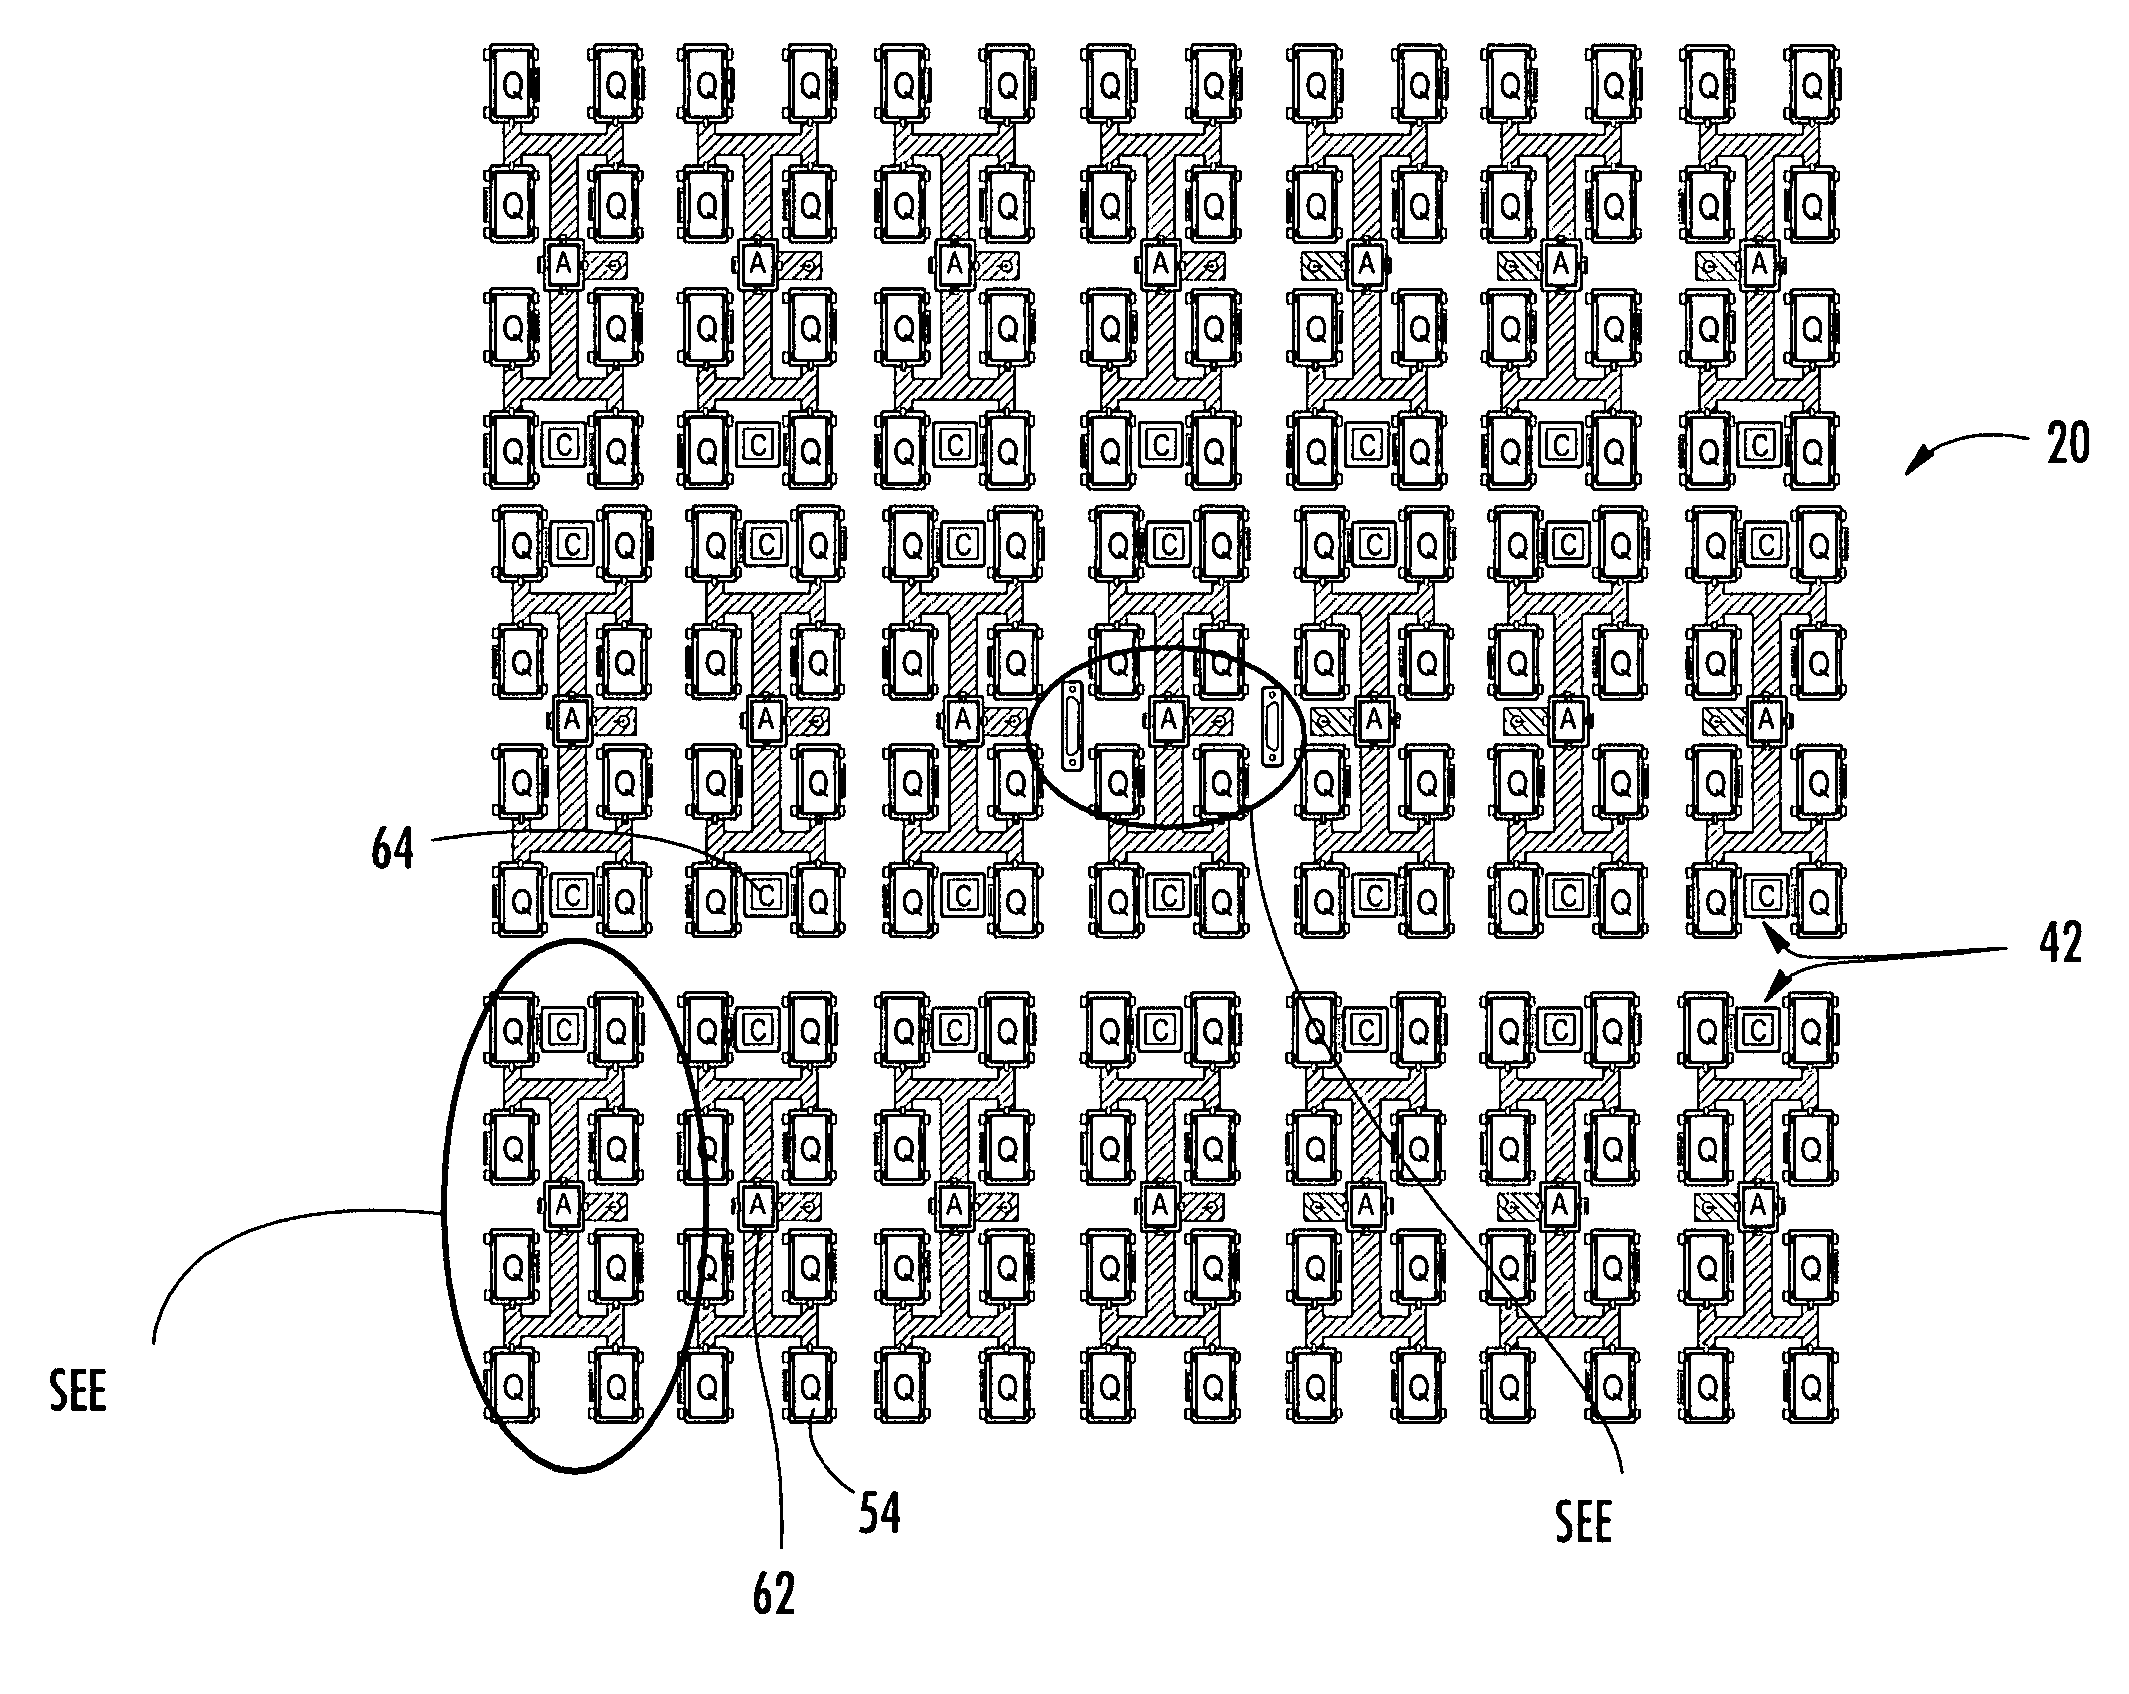 Printed wiring board with enhanced structural integrity